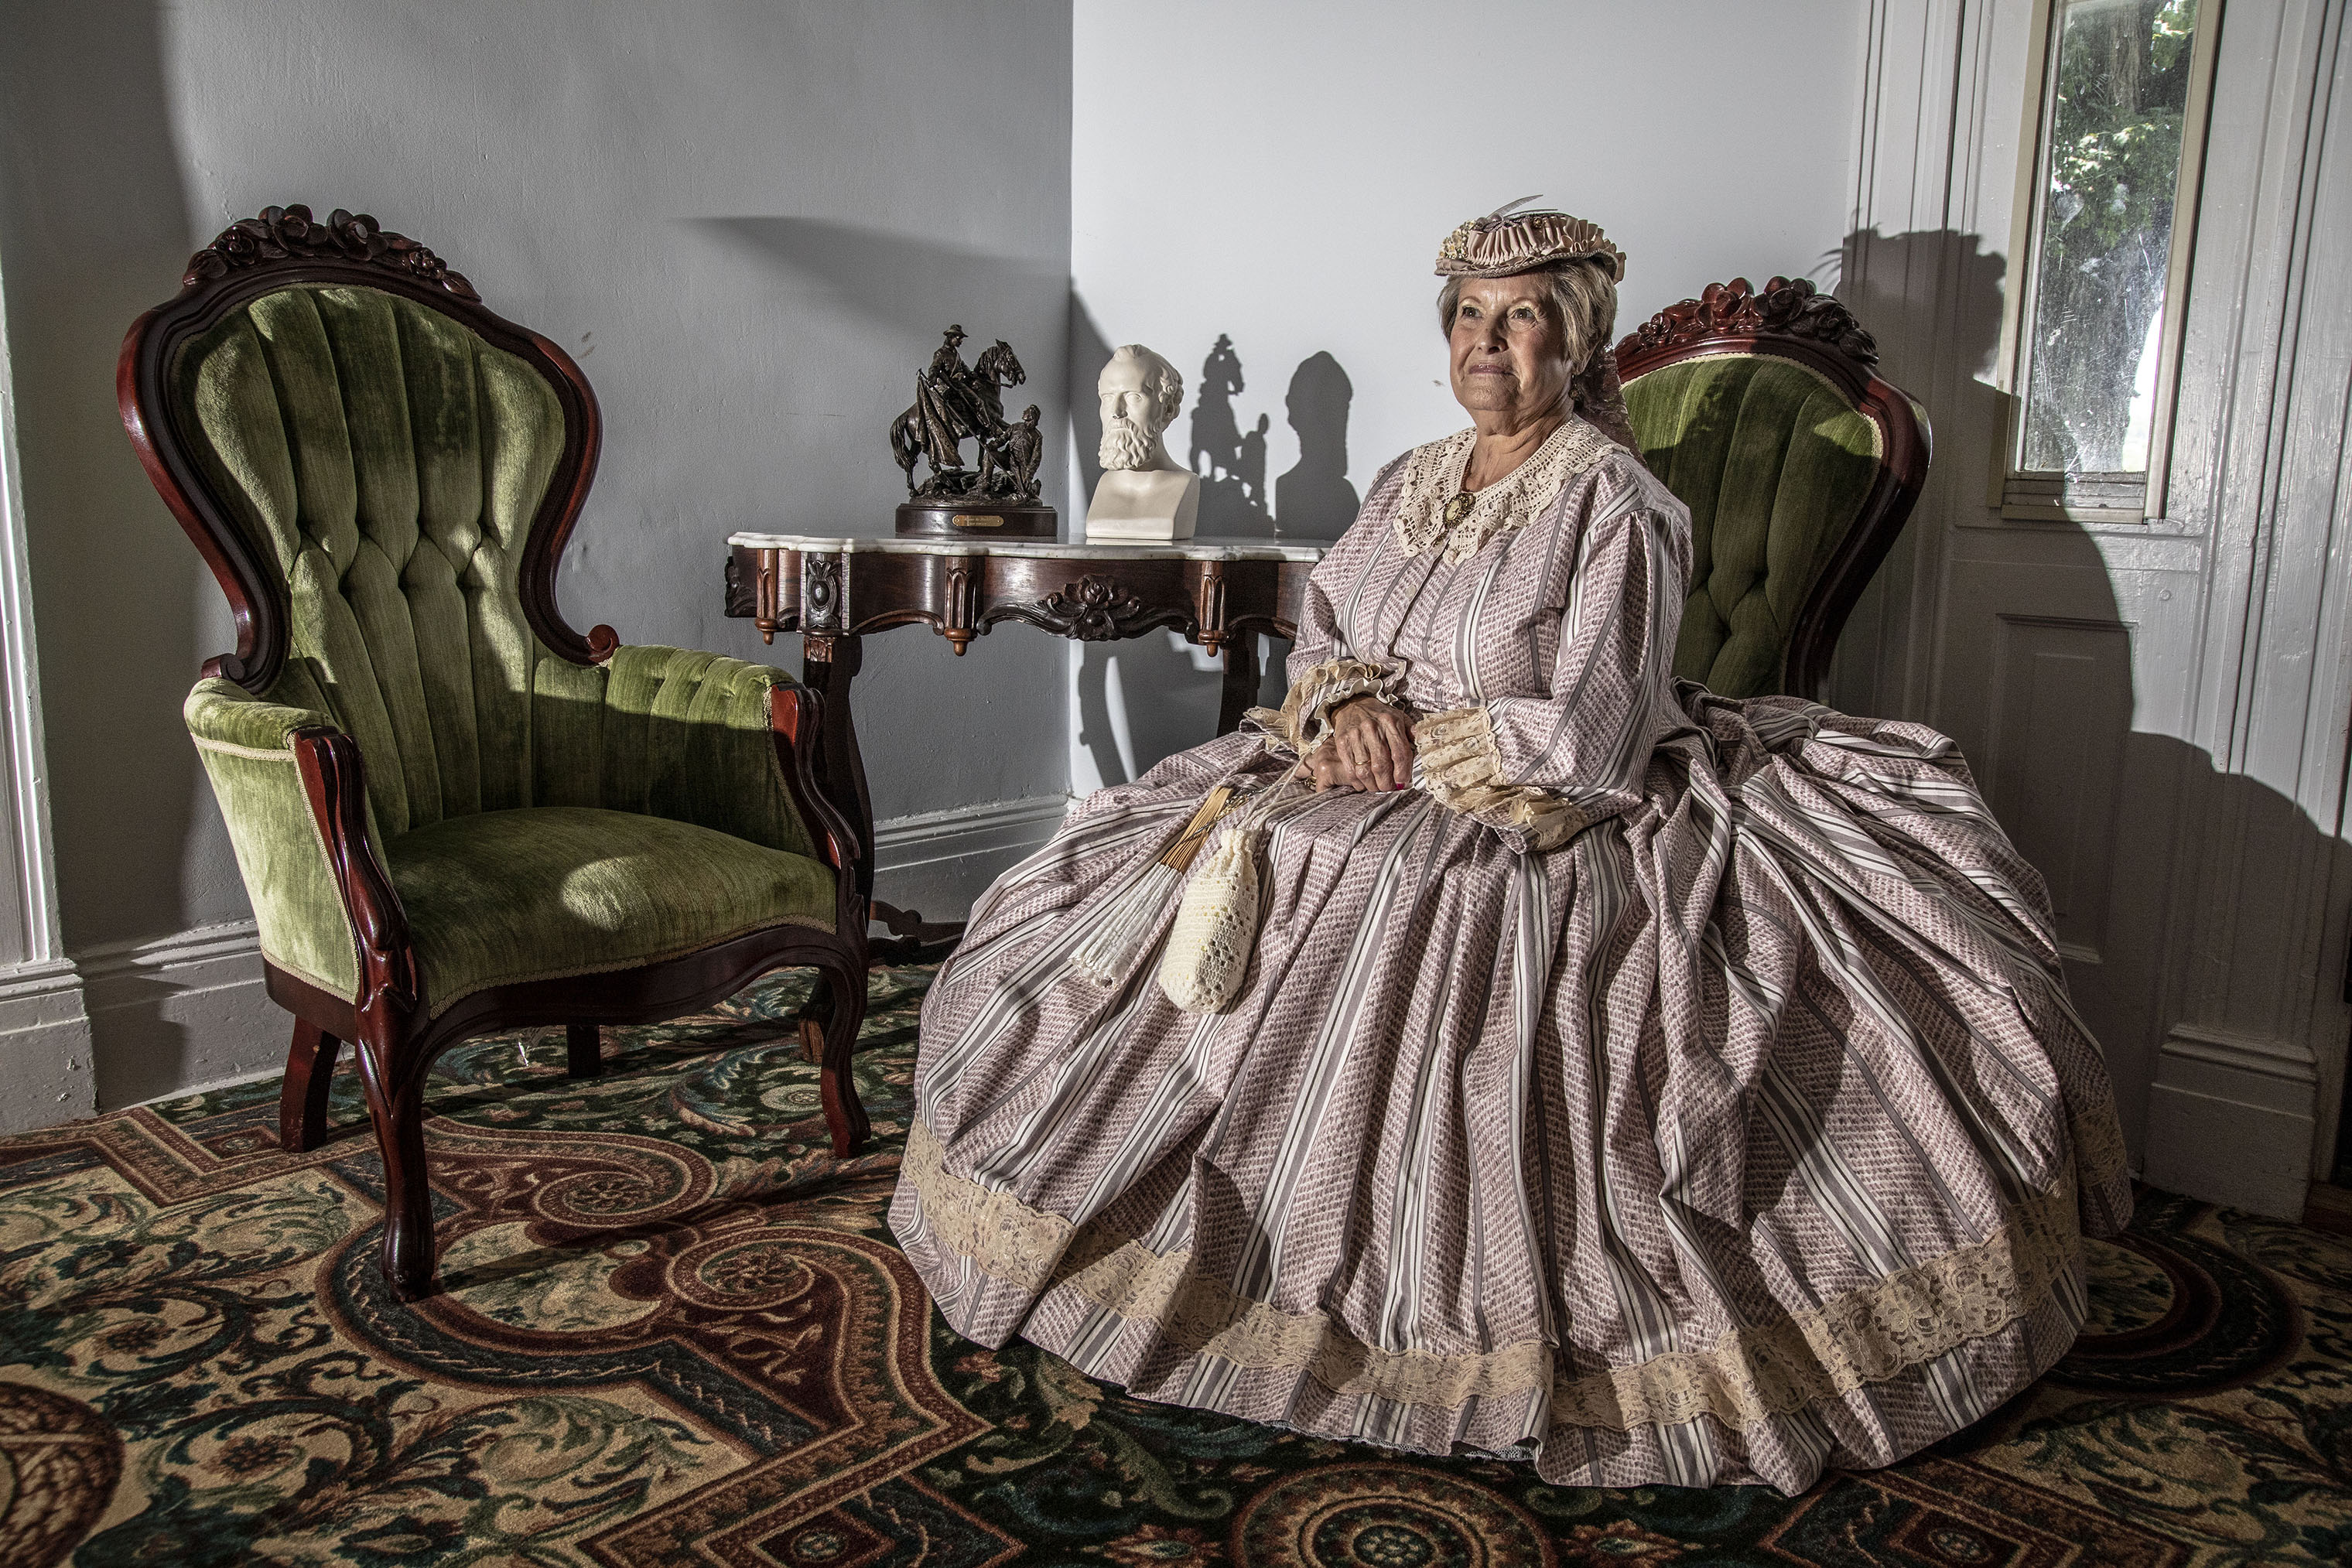 A reenactor at the Elm Springs house, which serves as the Sons of Confederate Veterans General Headquarters, in Columbia, Tenn. (Mark Peterson—Redux for TIME)